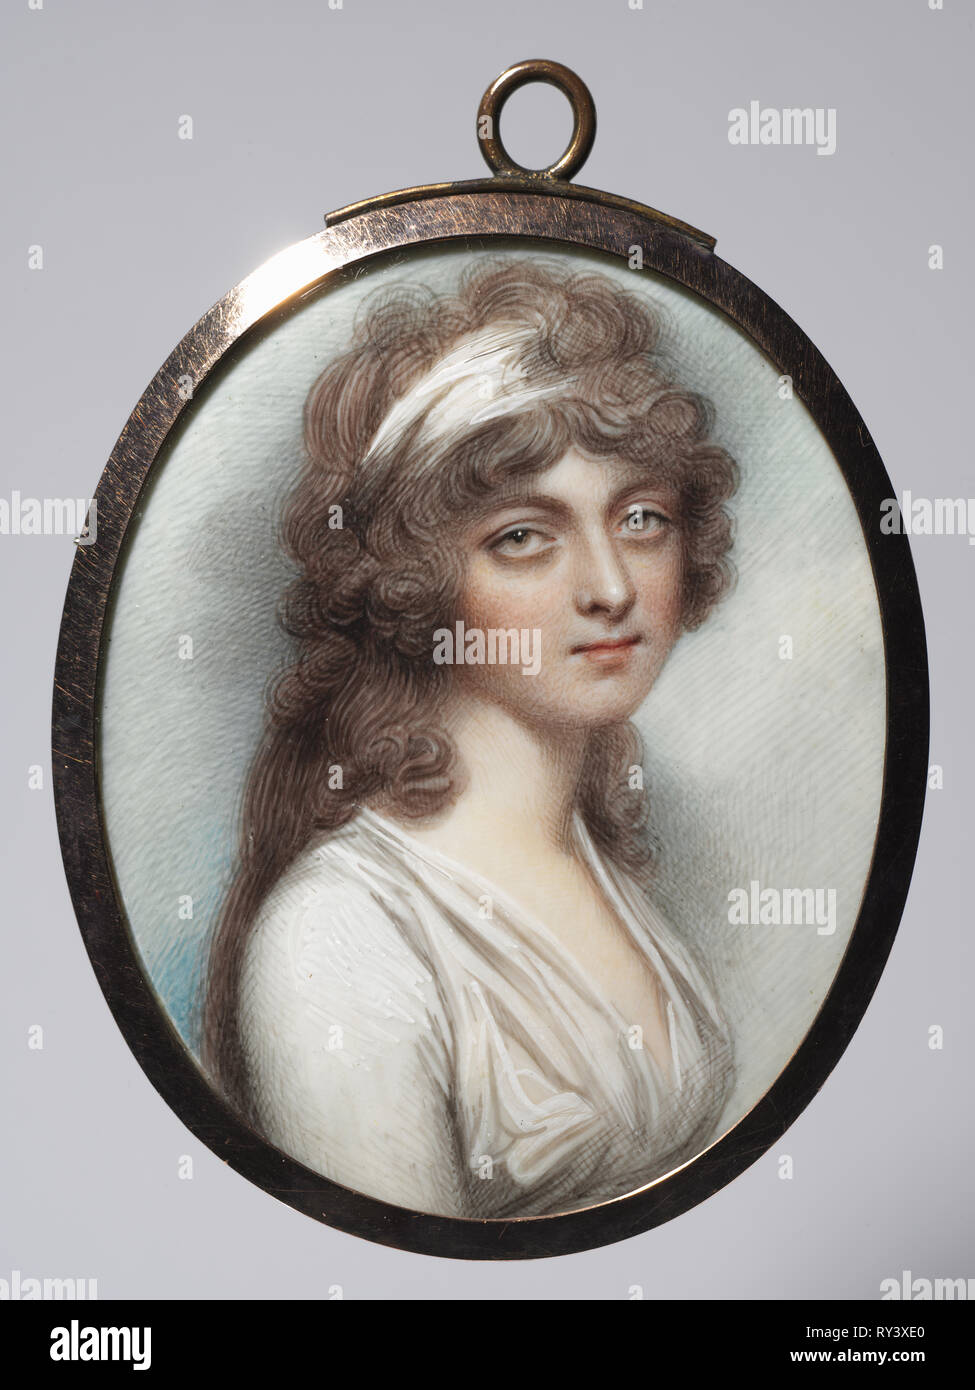 Portrait of Anna Walmesley, 1795. Andrew Plimer (British, 1763-1837). Watercolor on ivory in a gold frame with hair reverse; image: 6.4 x 5.6 cm (2 1/2 x 2 3/16 in.); framed: 7.5 x 6 cm (2 15/16 x 2 3/8 in.); sight: 6.7 x 5.4 cm (2 5/8 x 2 1/8 in Stock Photo